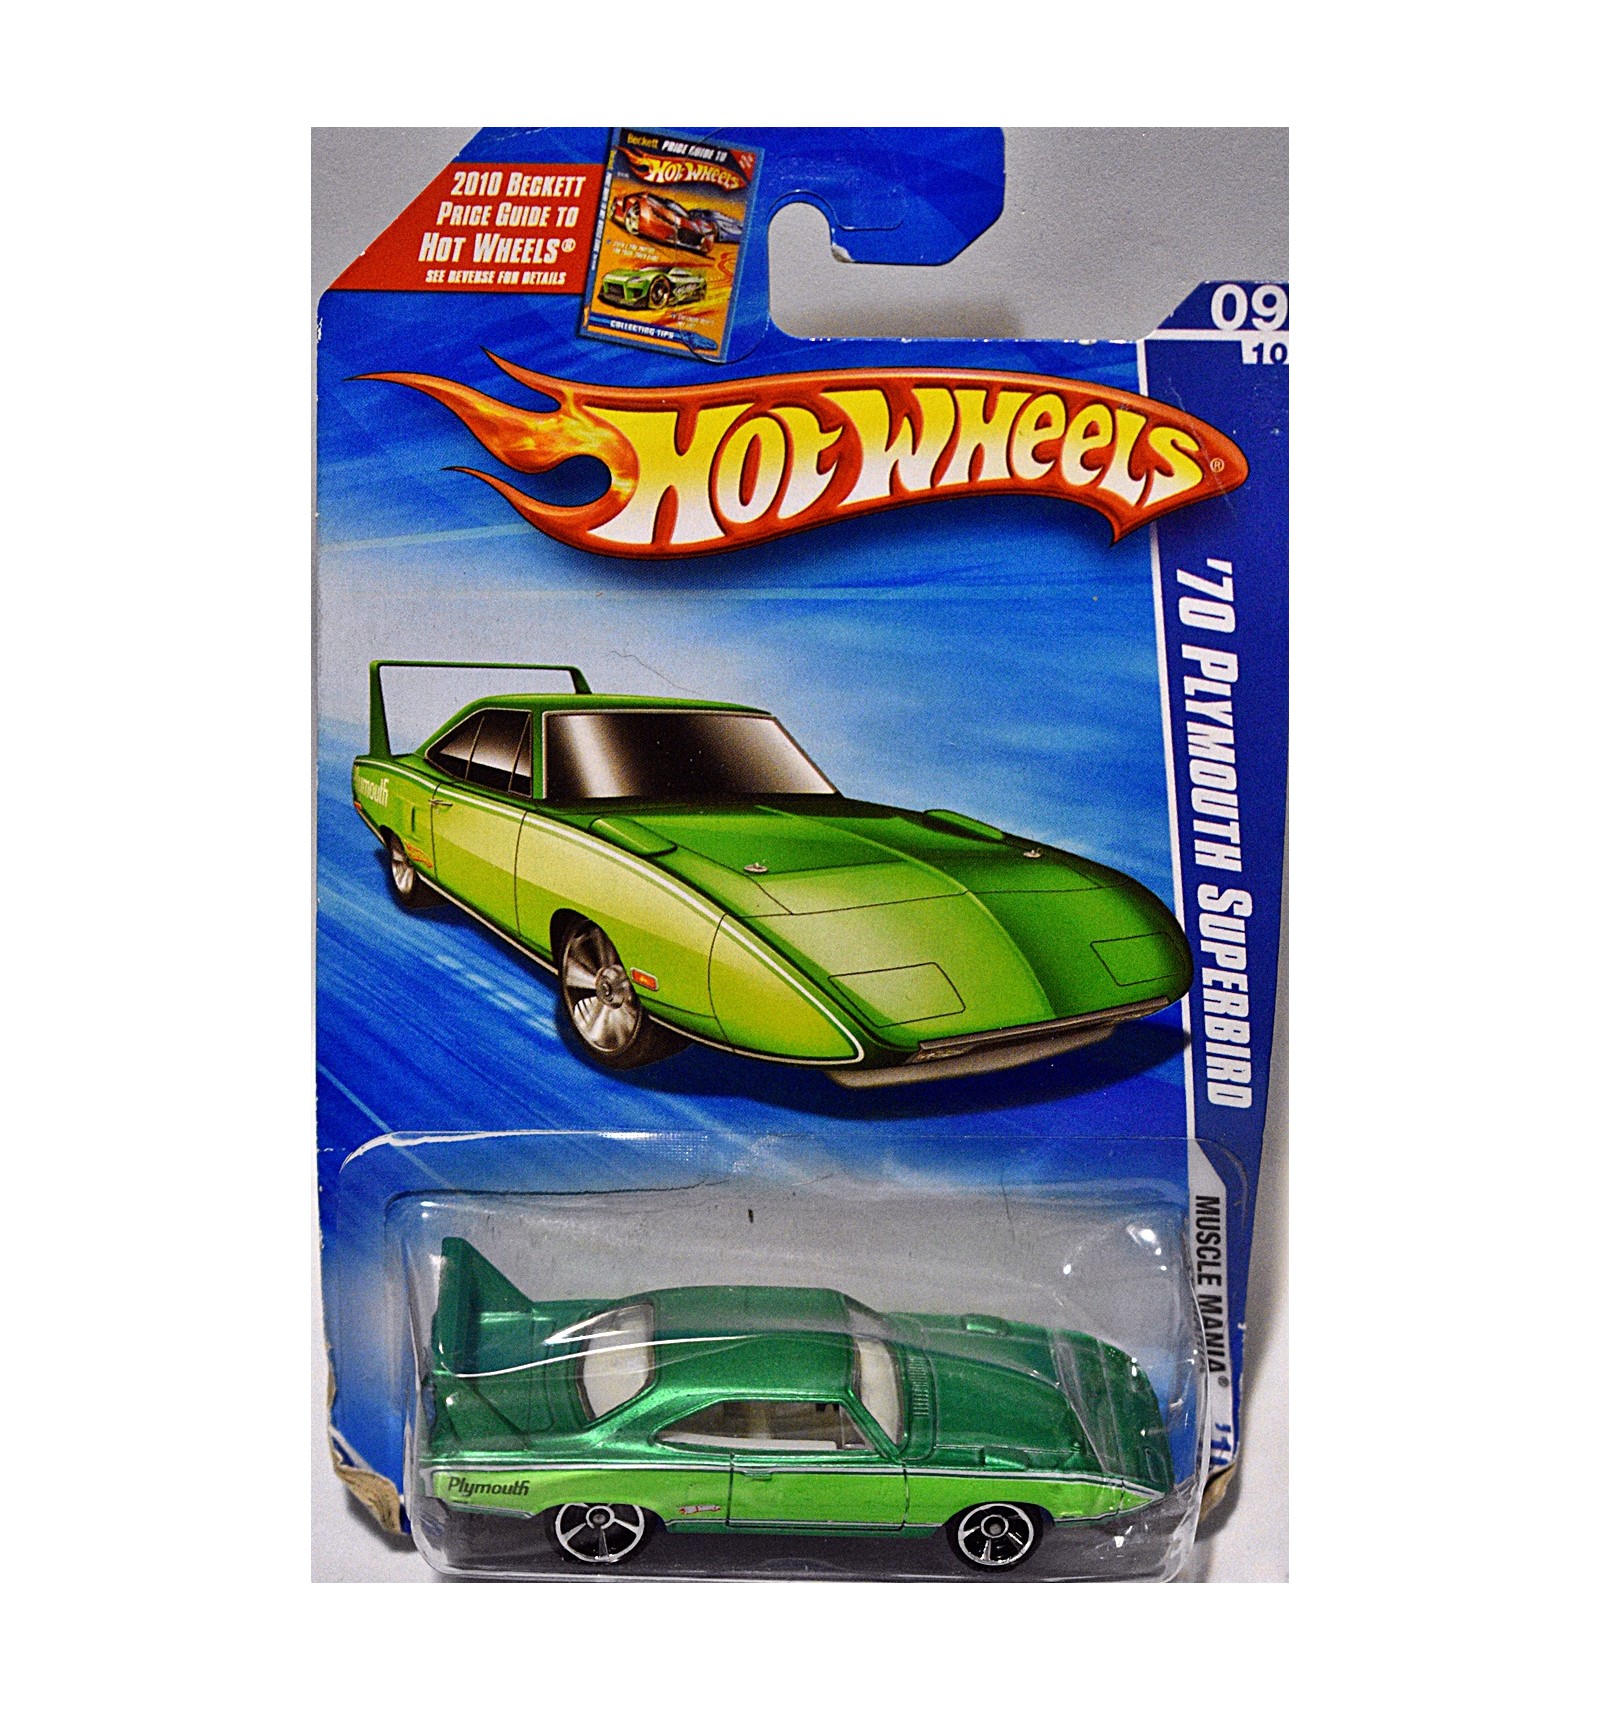 Hot Wheels Premium Plymouth Superbird and Charger no hesitation!buy now! 